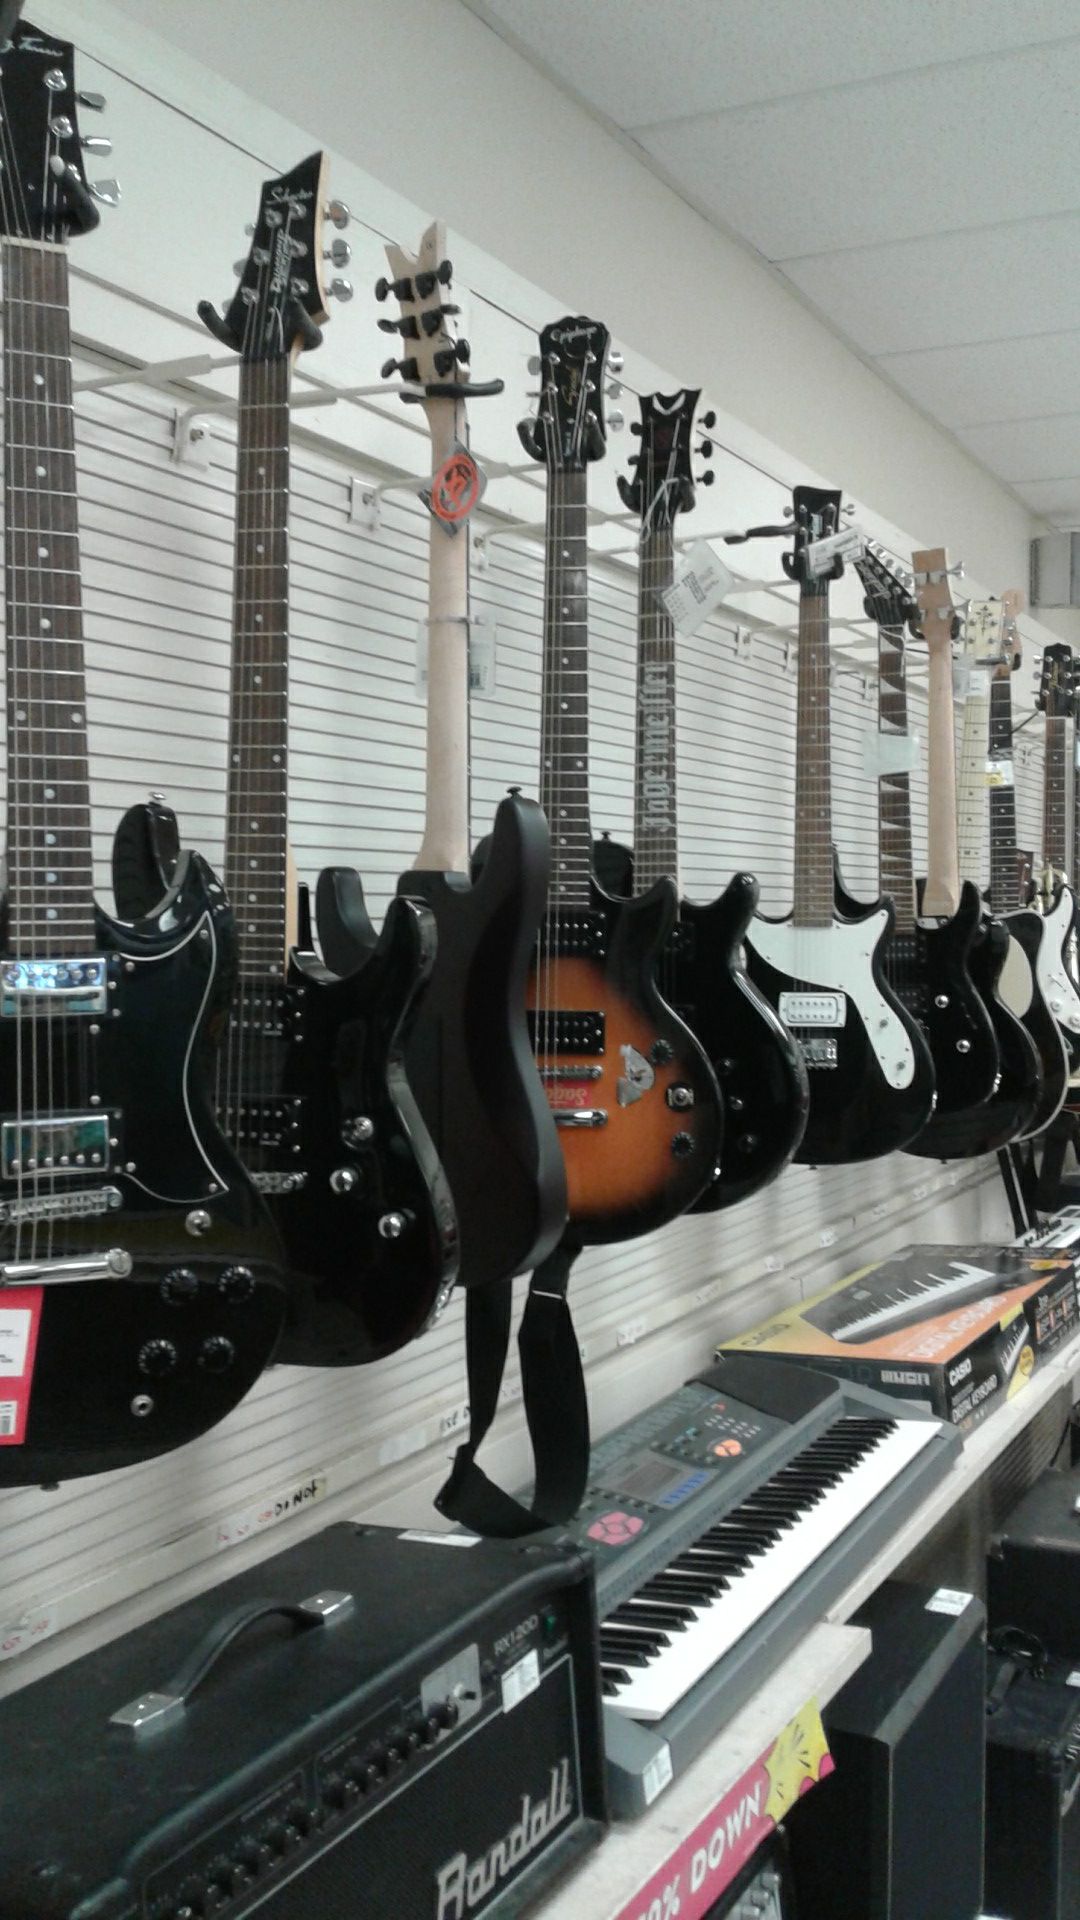 Musical Equipment, Guitars, Keyboard, Amps, Prices as low as $24!